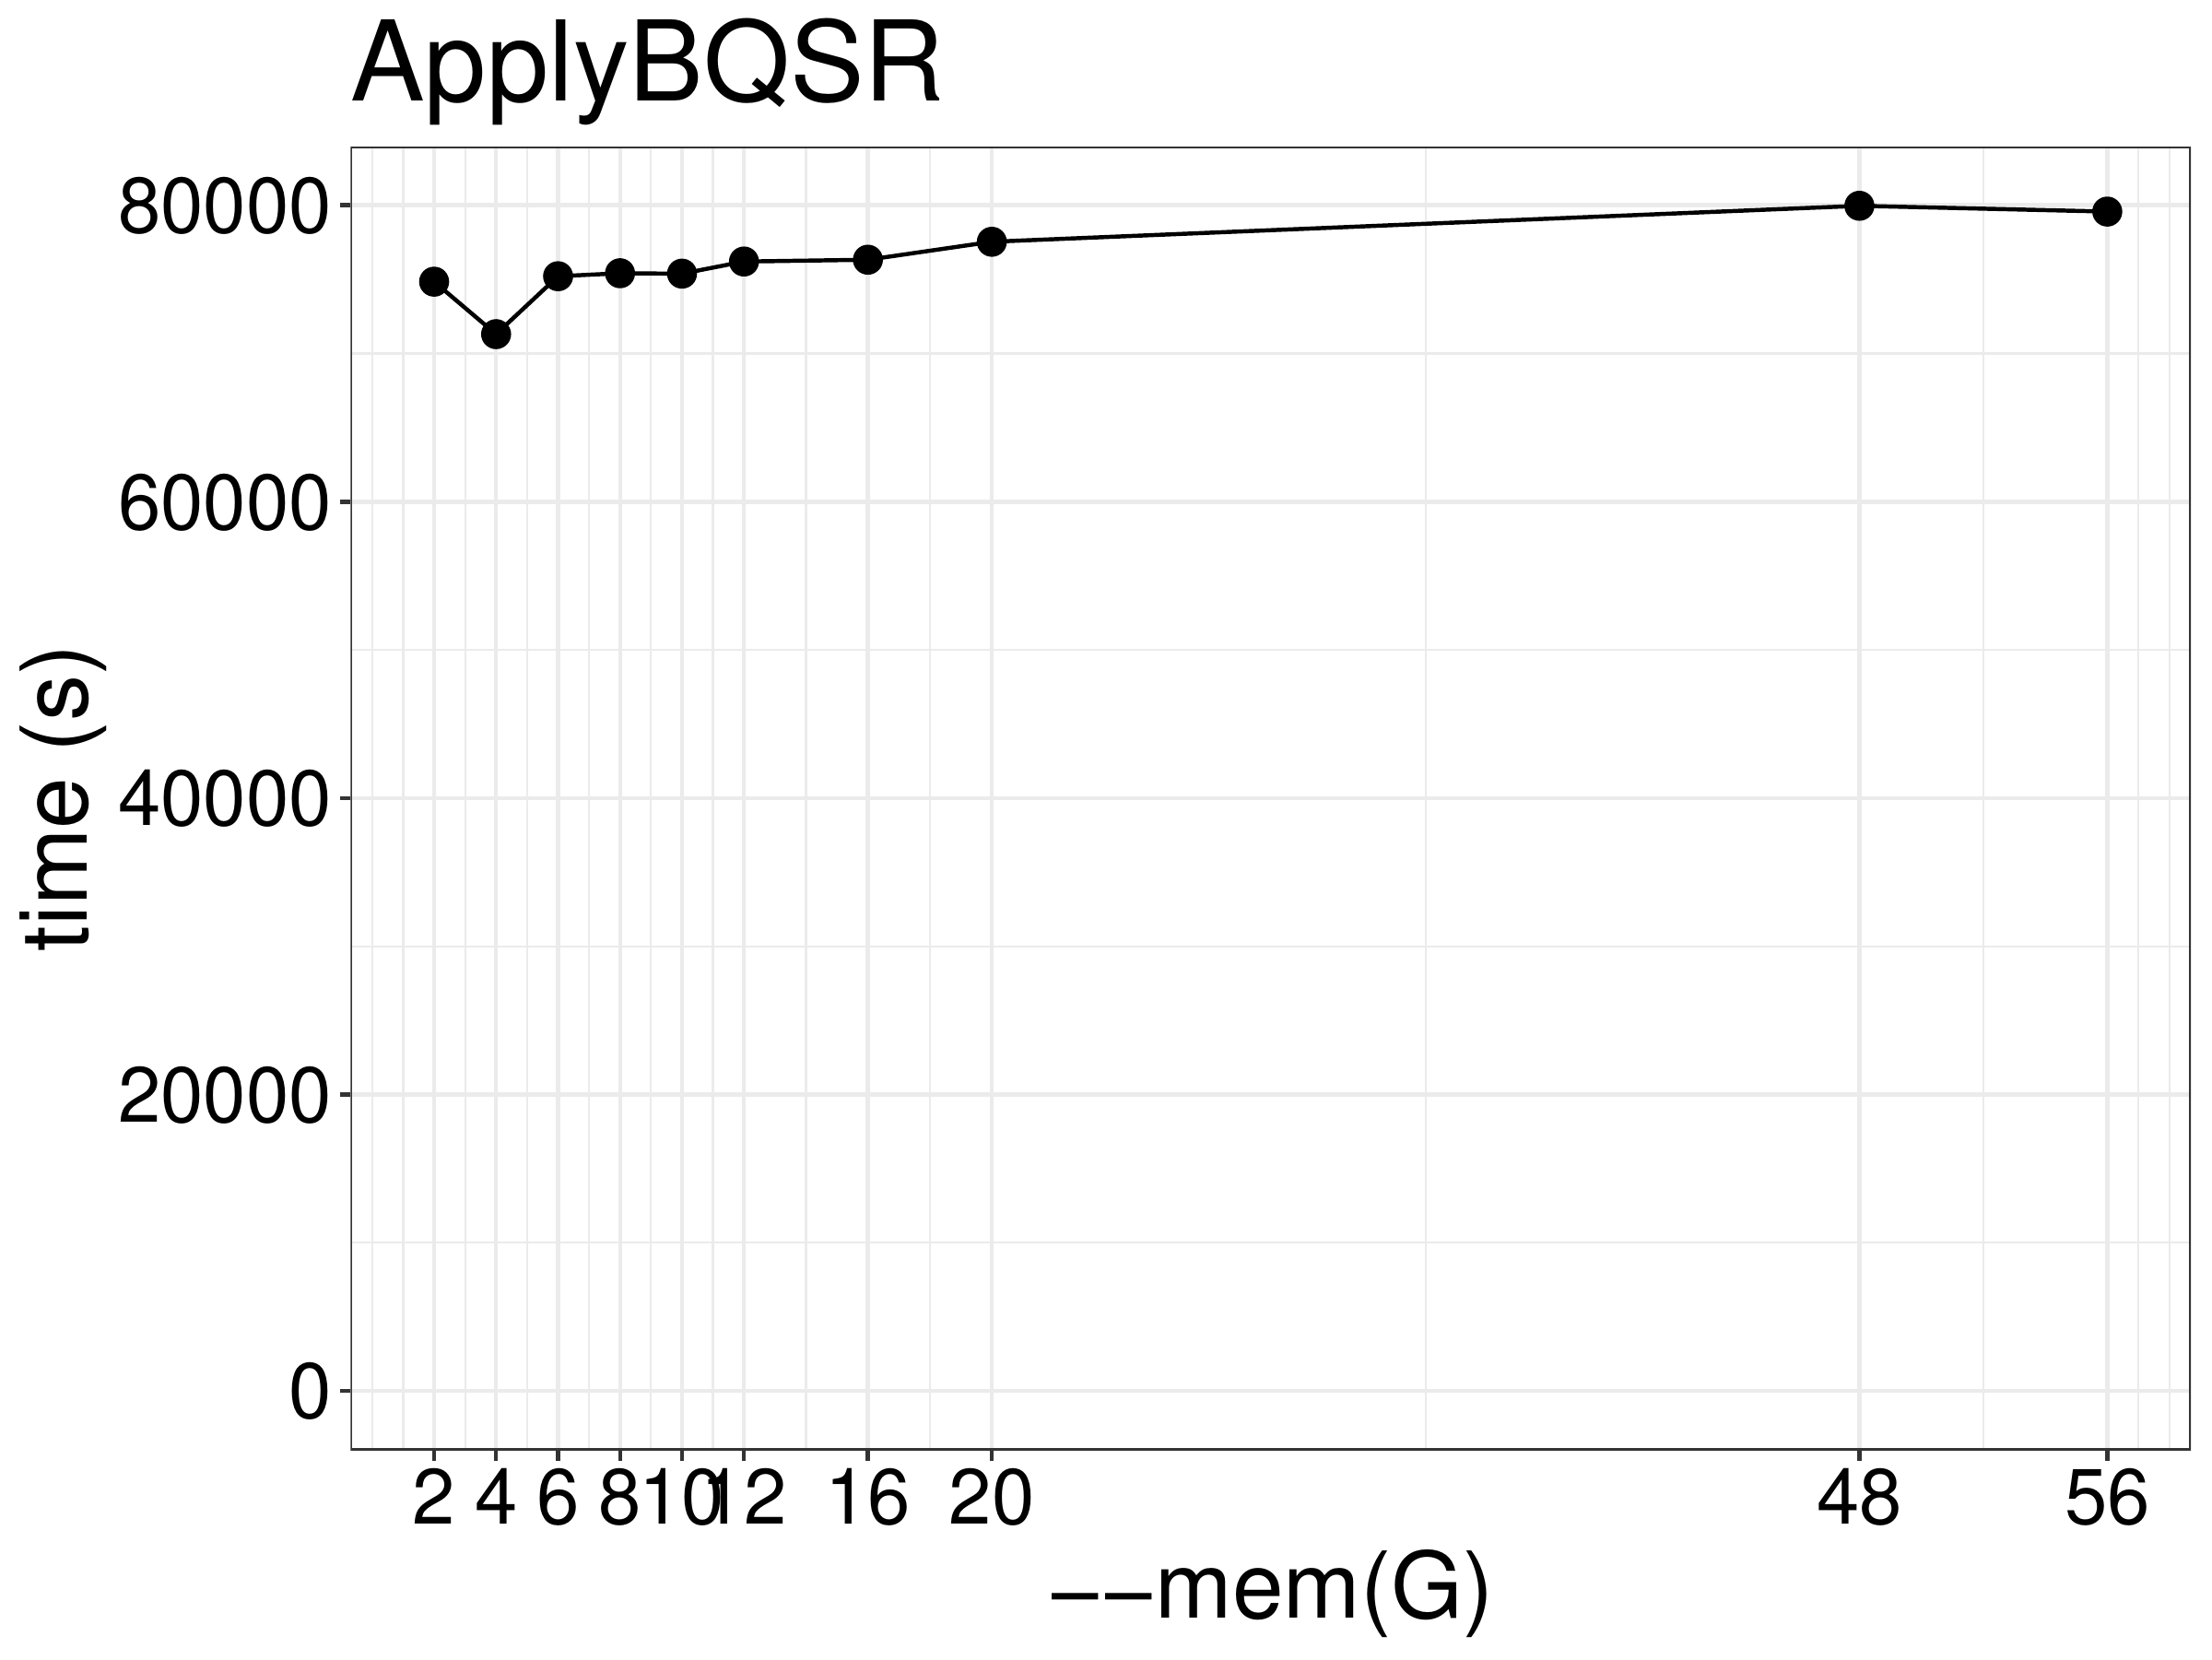 ApplyBQSR runtime as a function of memory